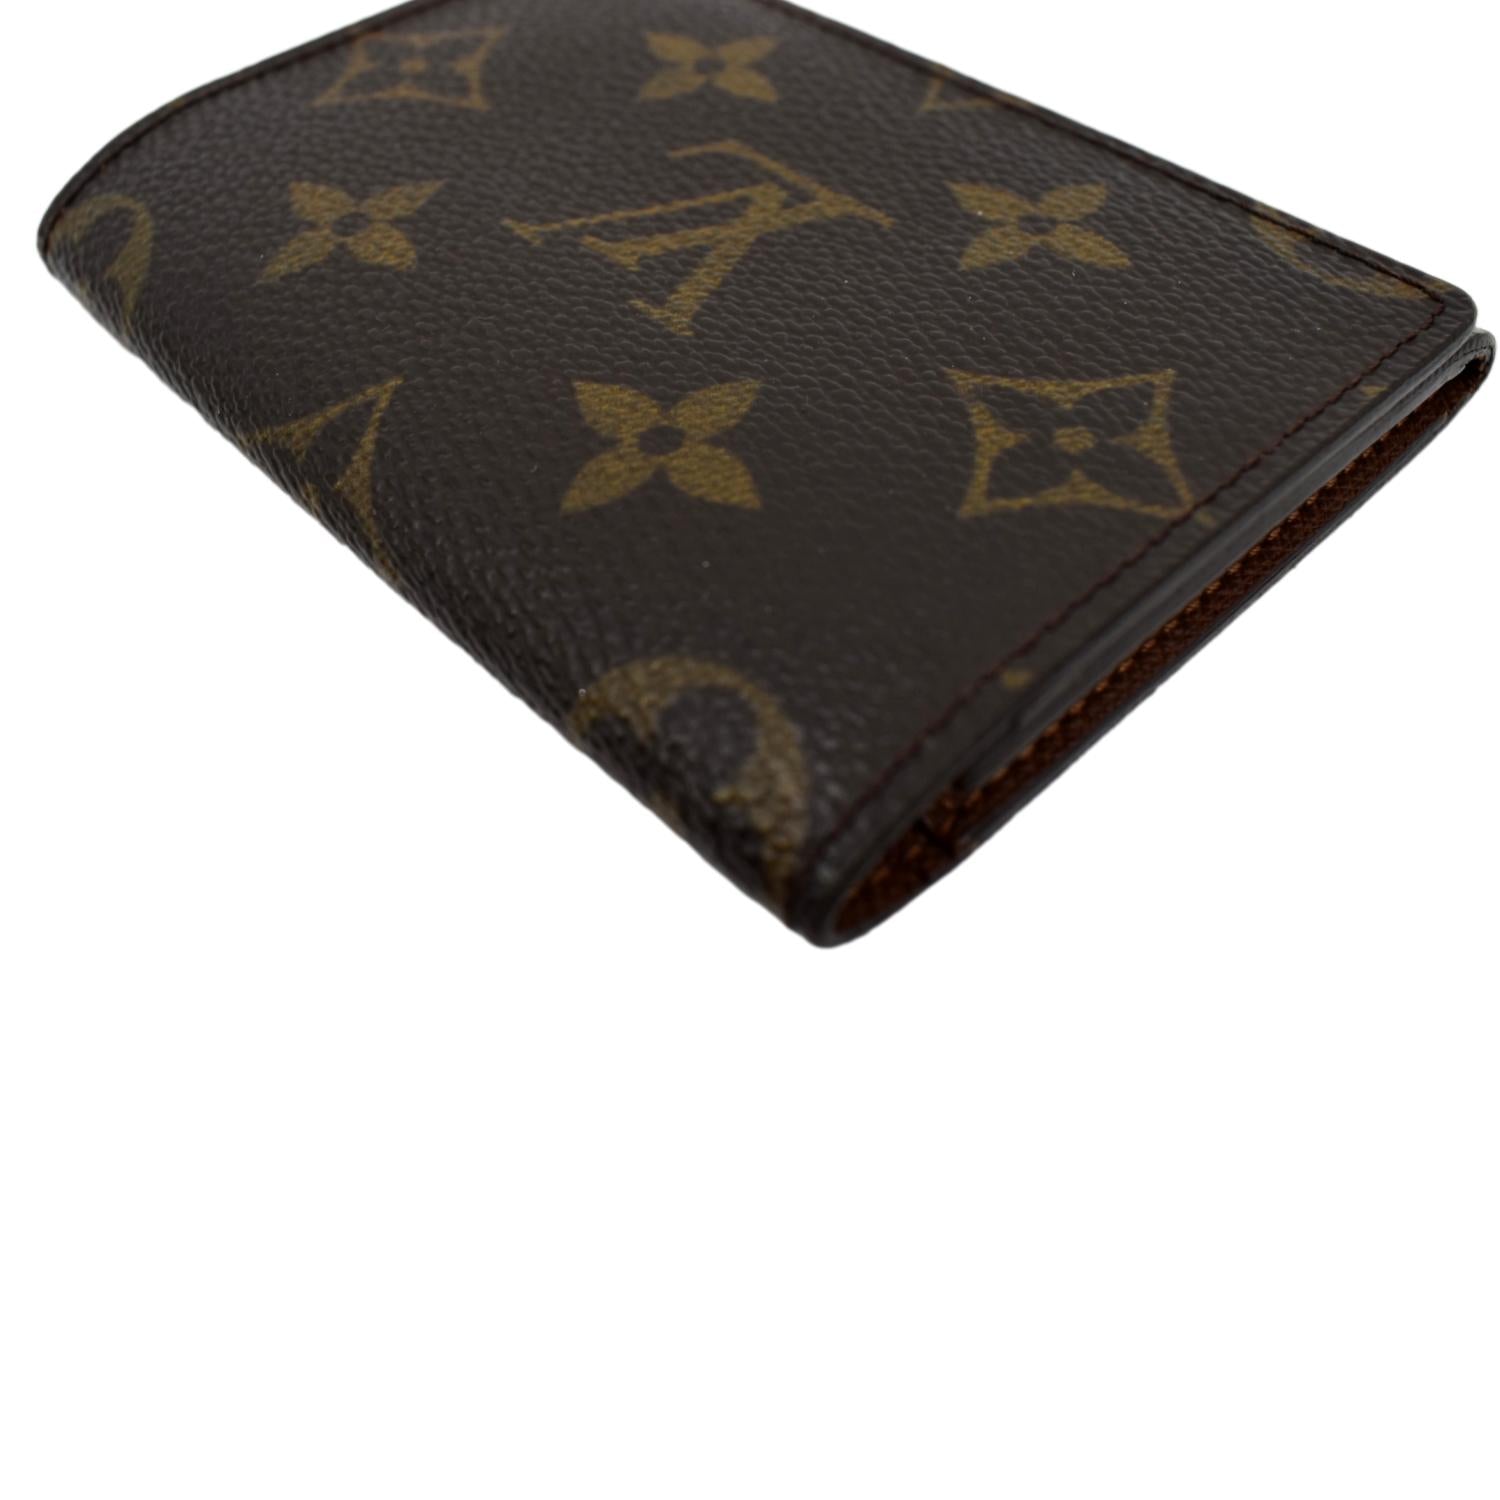 lv small wallet price